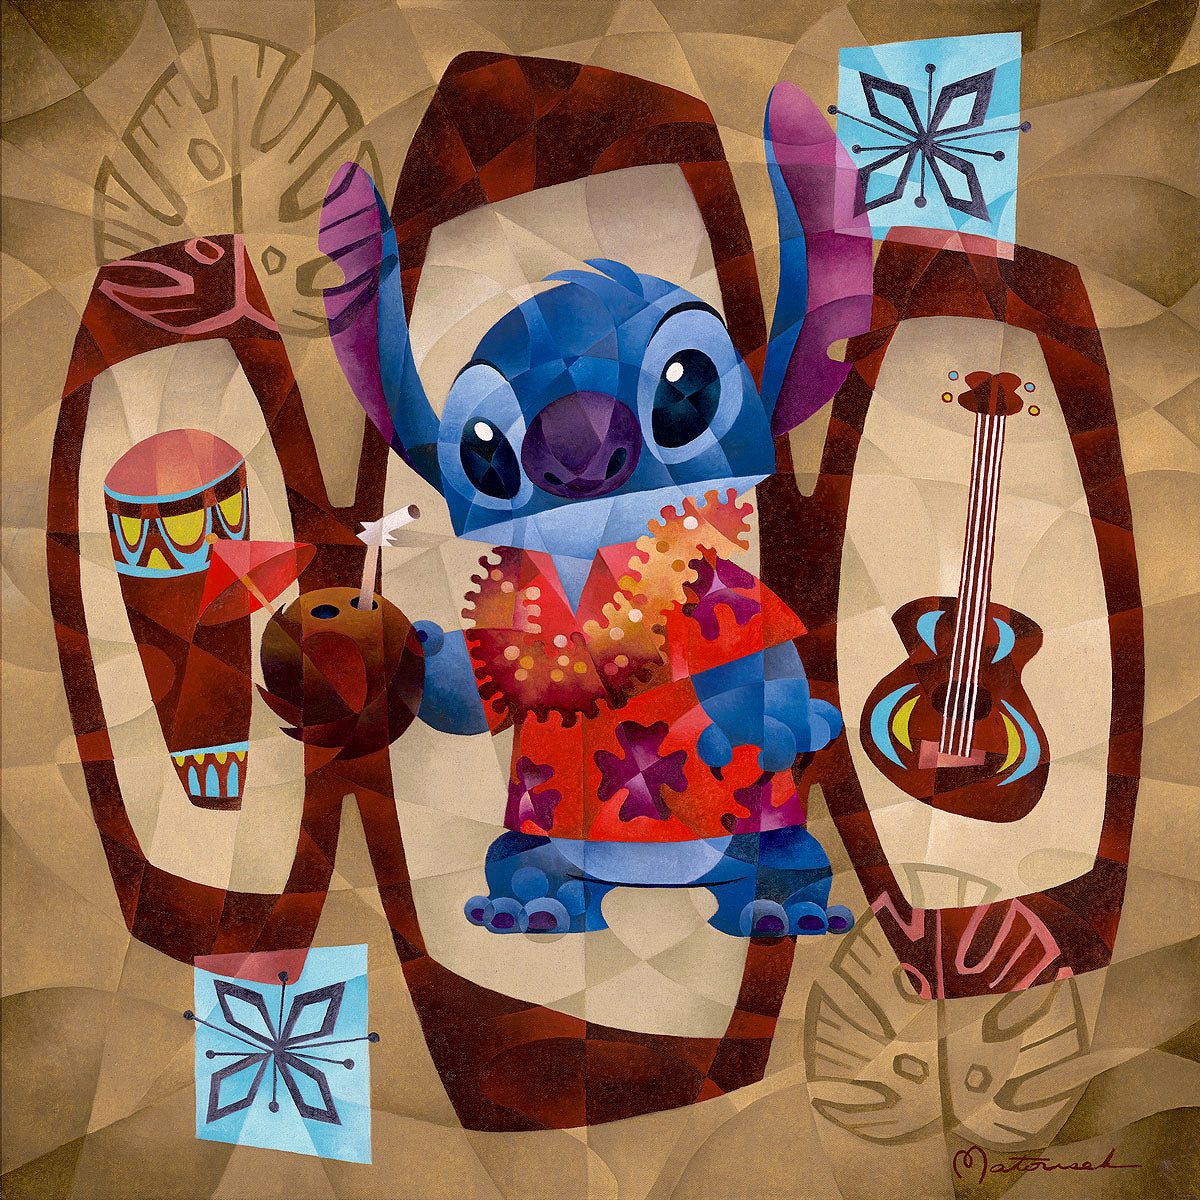 Stitch in his Hawaiian shirt, guitar and bongo drums.